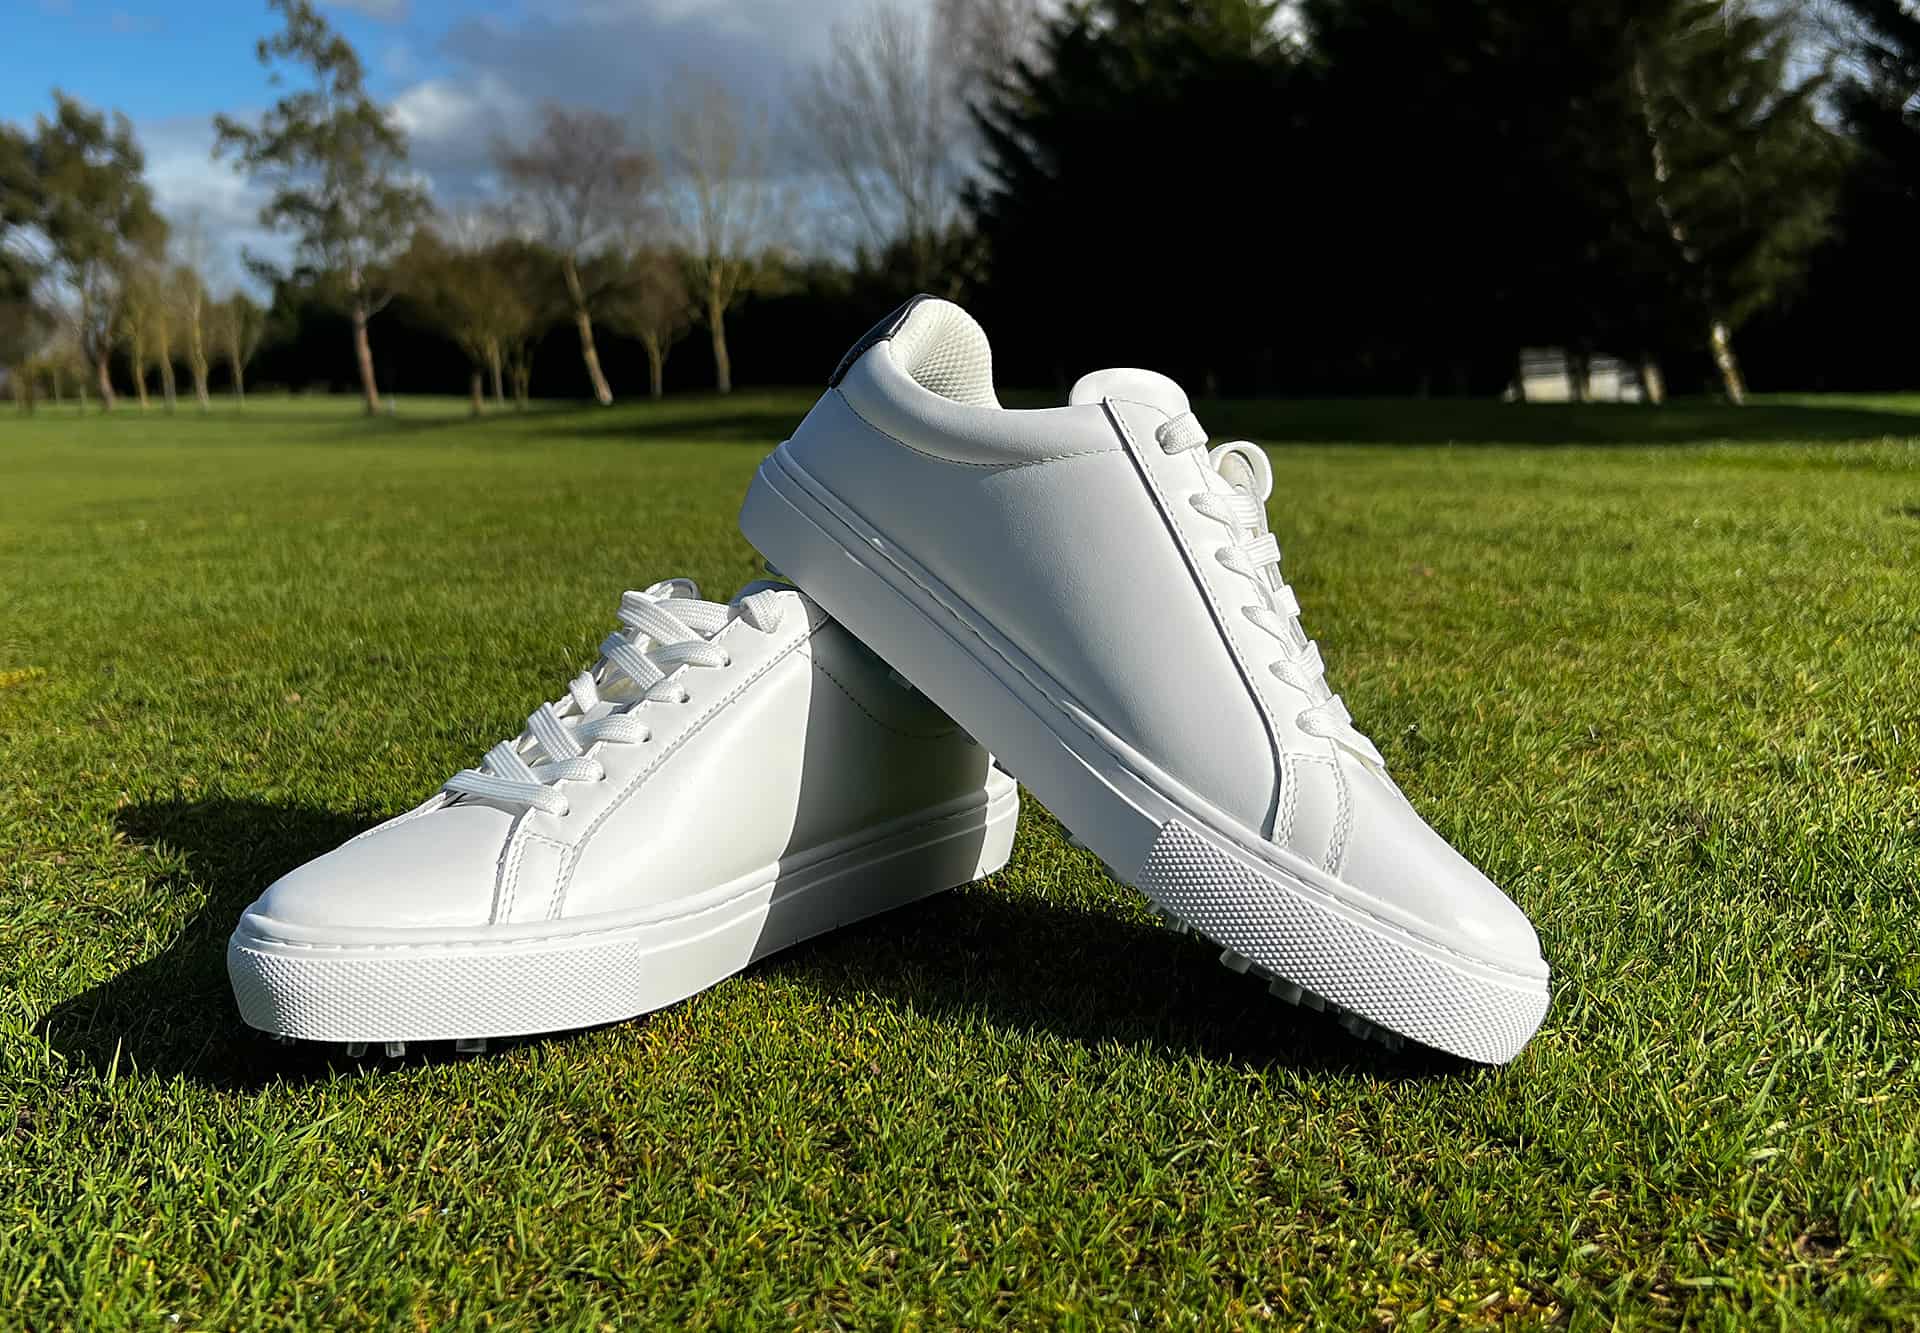 G/Fore Circle G Golf Shoe Review